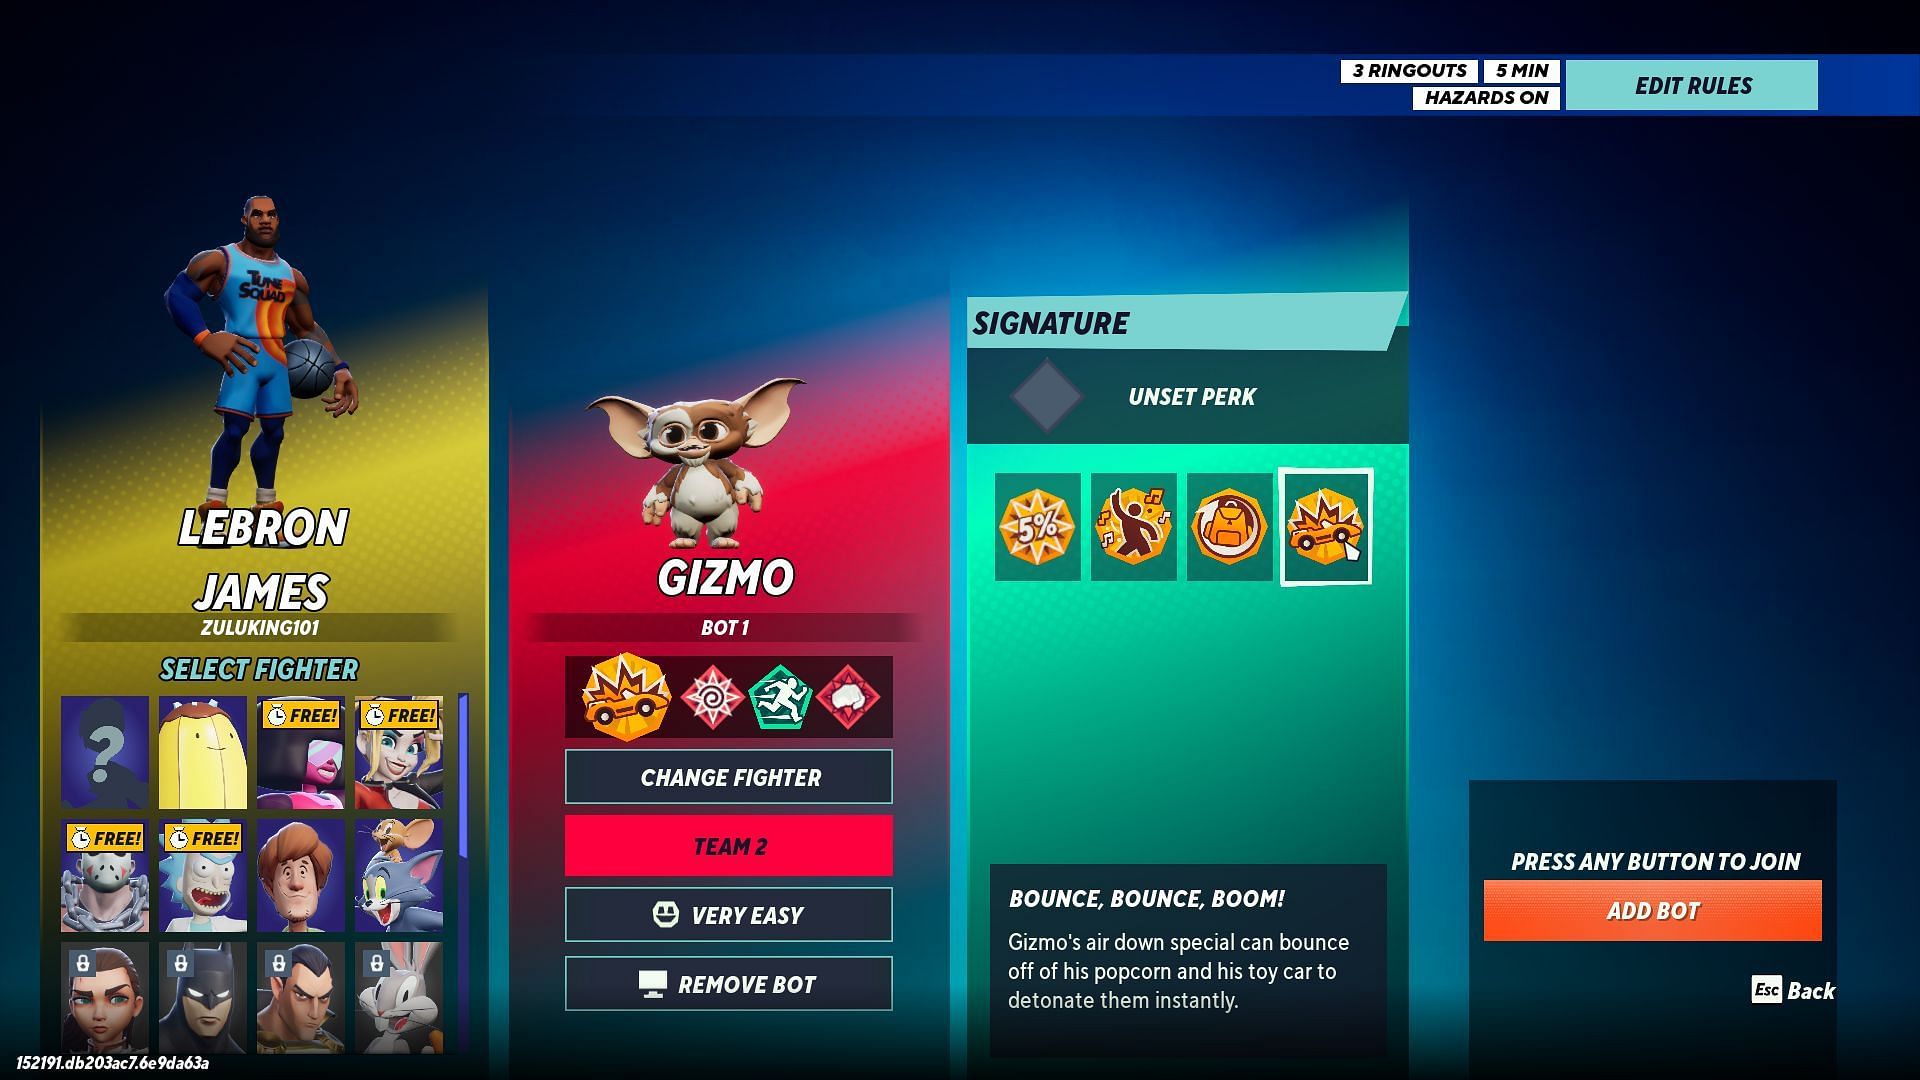 Gizmo&#039;s Bounce, Bounce, Boom! is a great signature perk. (Image via Warner Bros. Games)